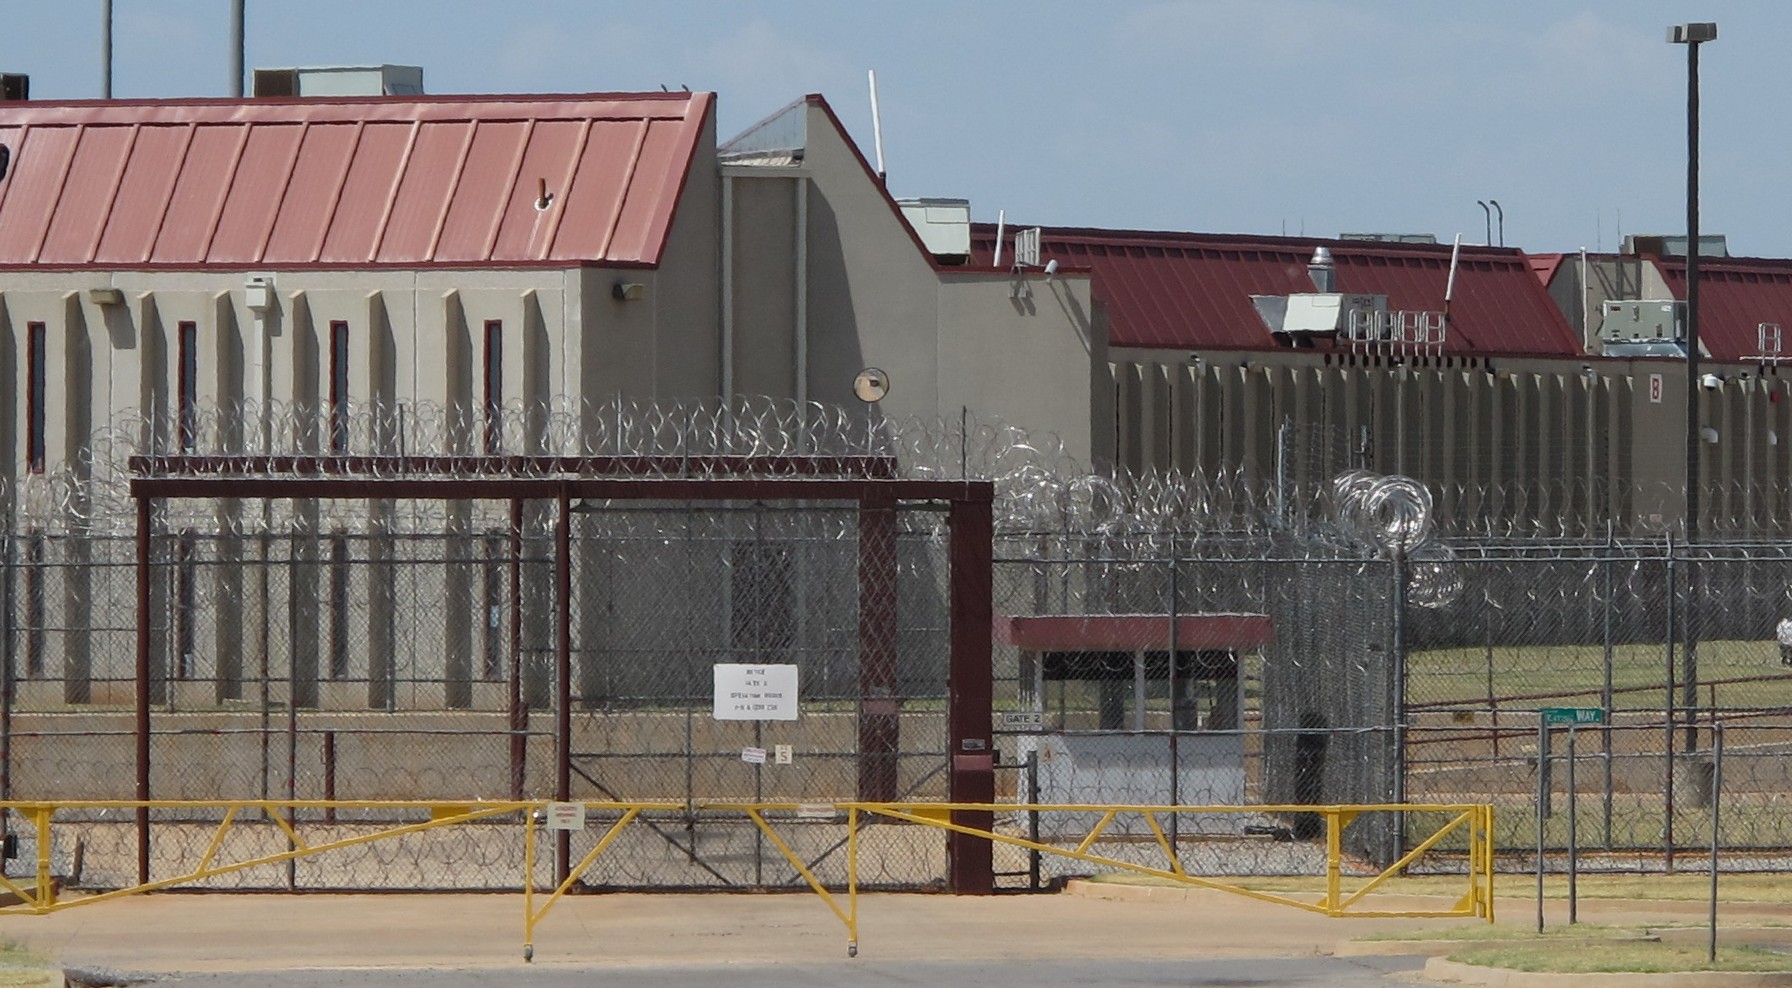 Correctional officer hurt after fight in Oklahoma prison